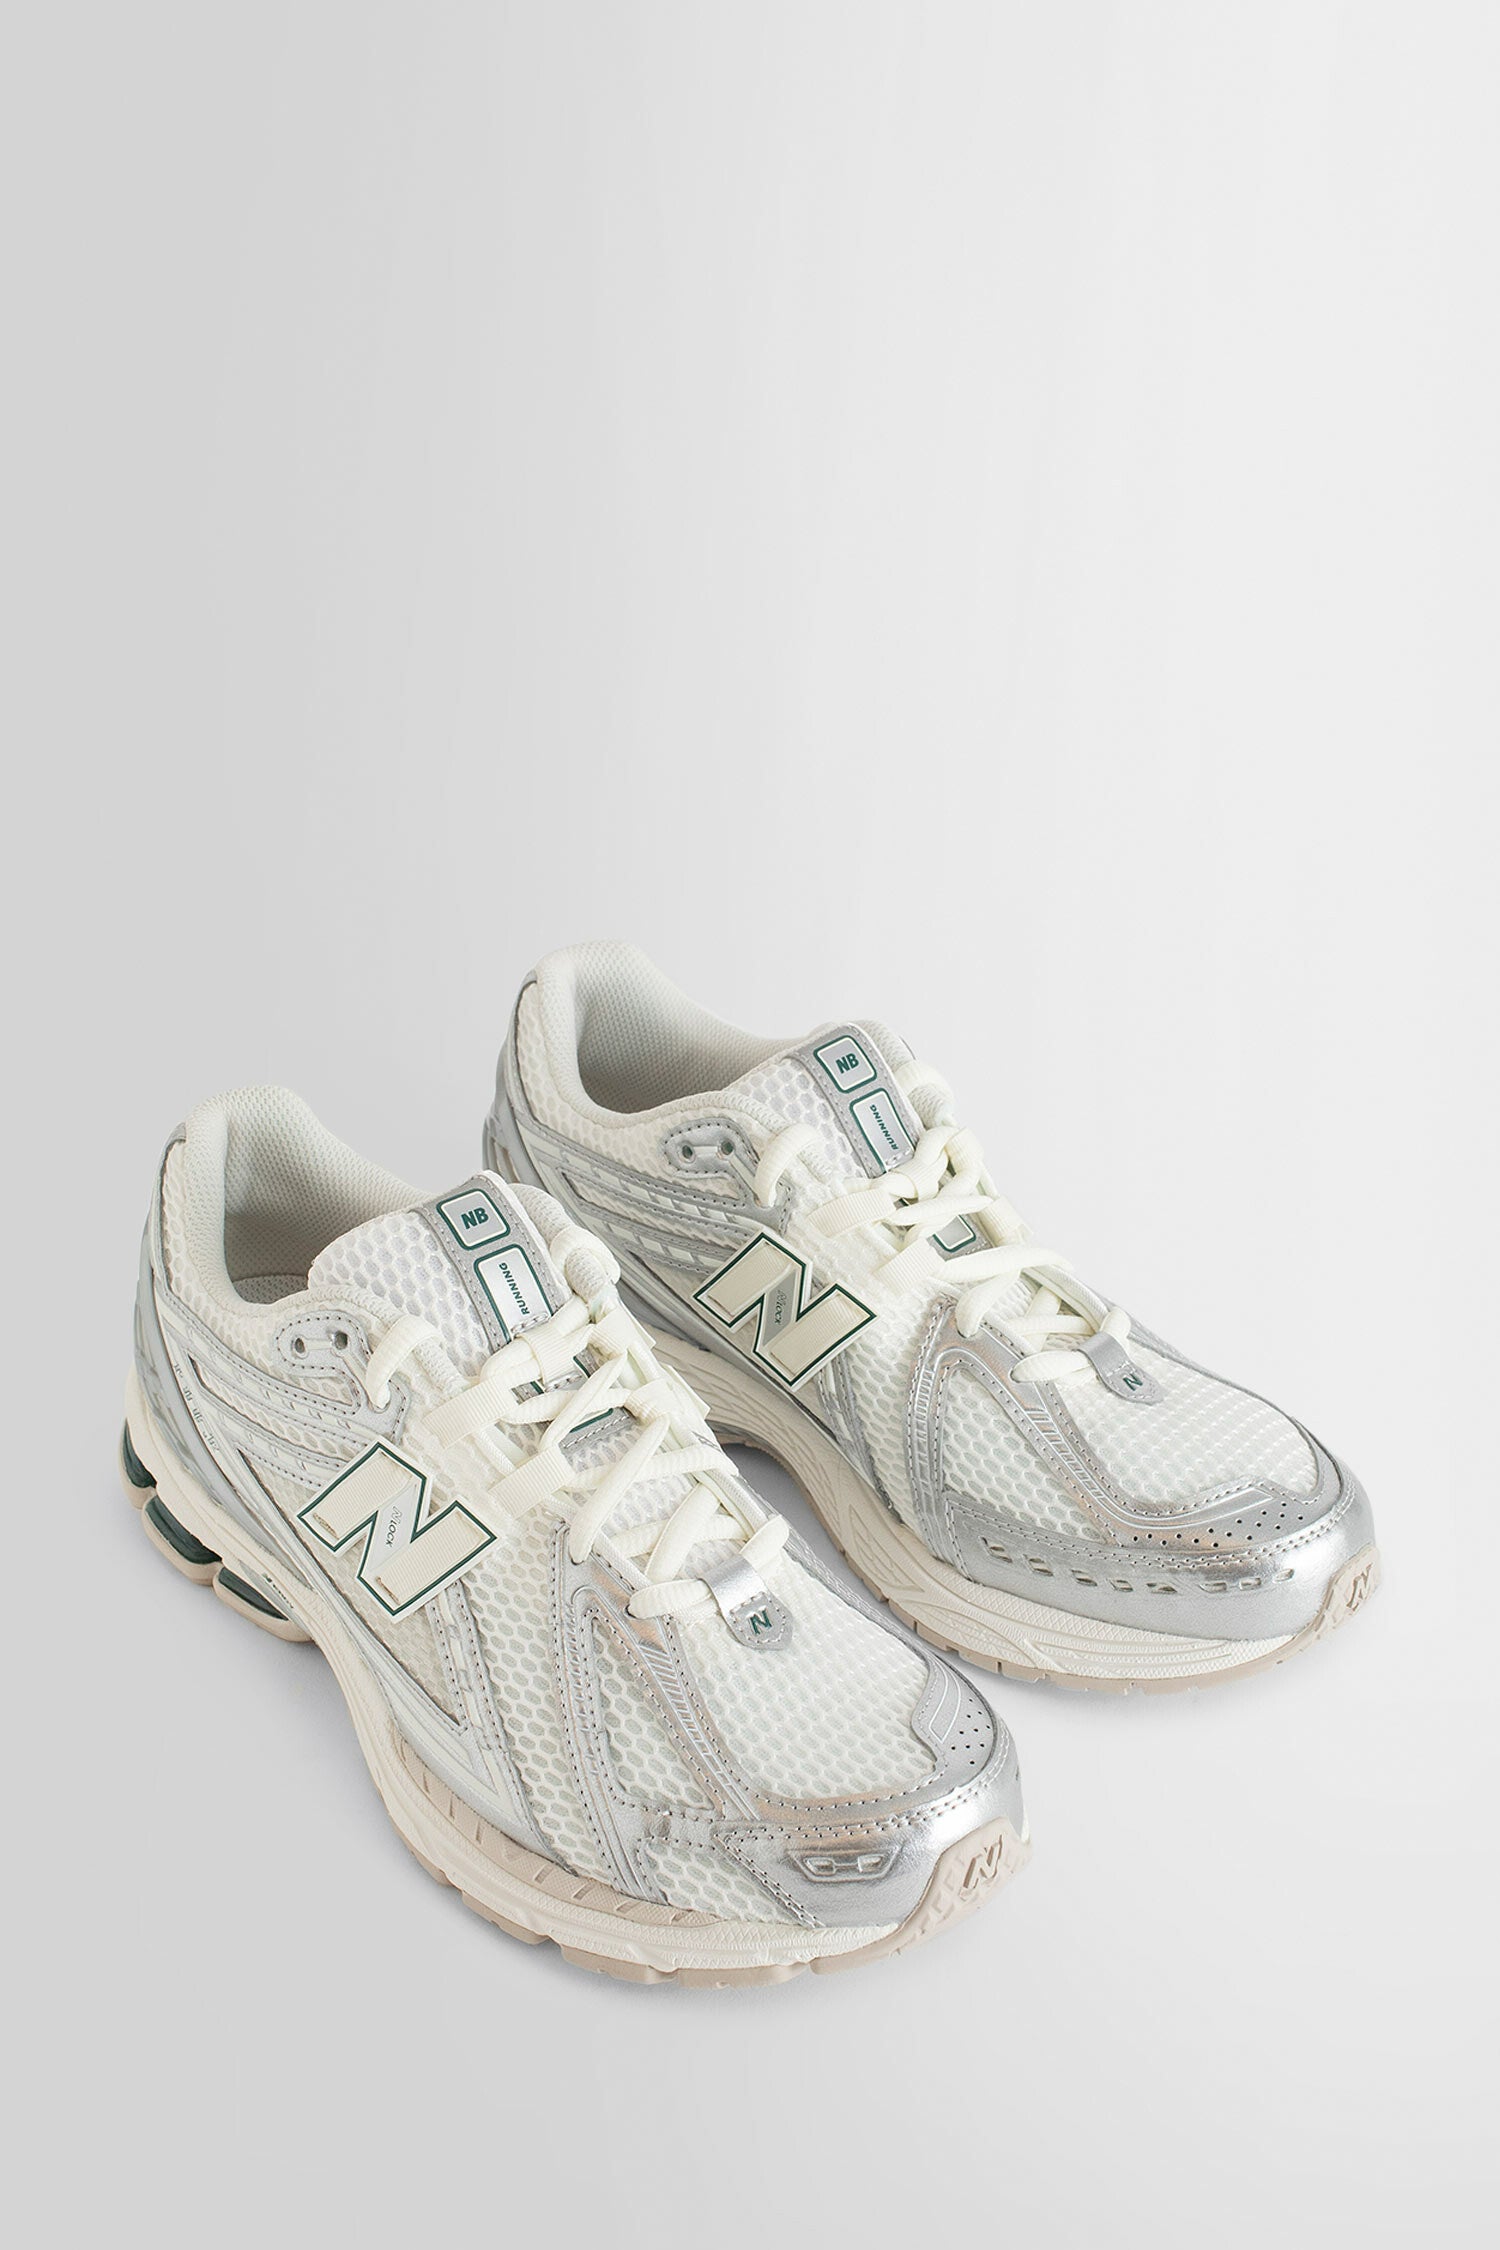 NEW BALANCE UNISEX SILVER SNEAKERS - NEW BALANCE - SNEAKERS